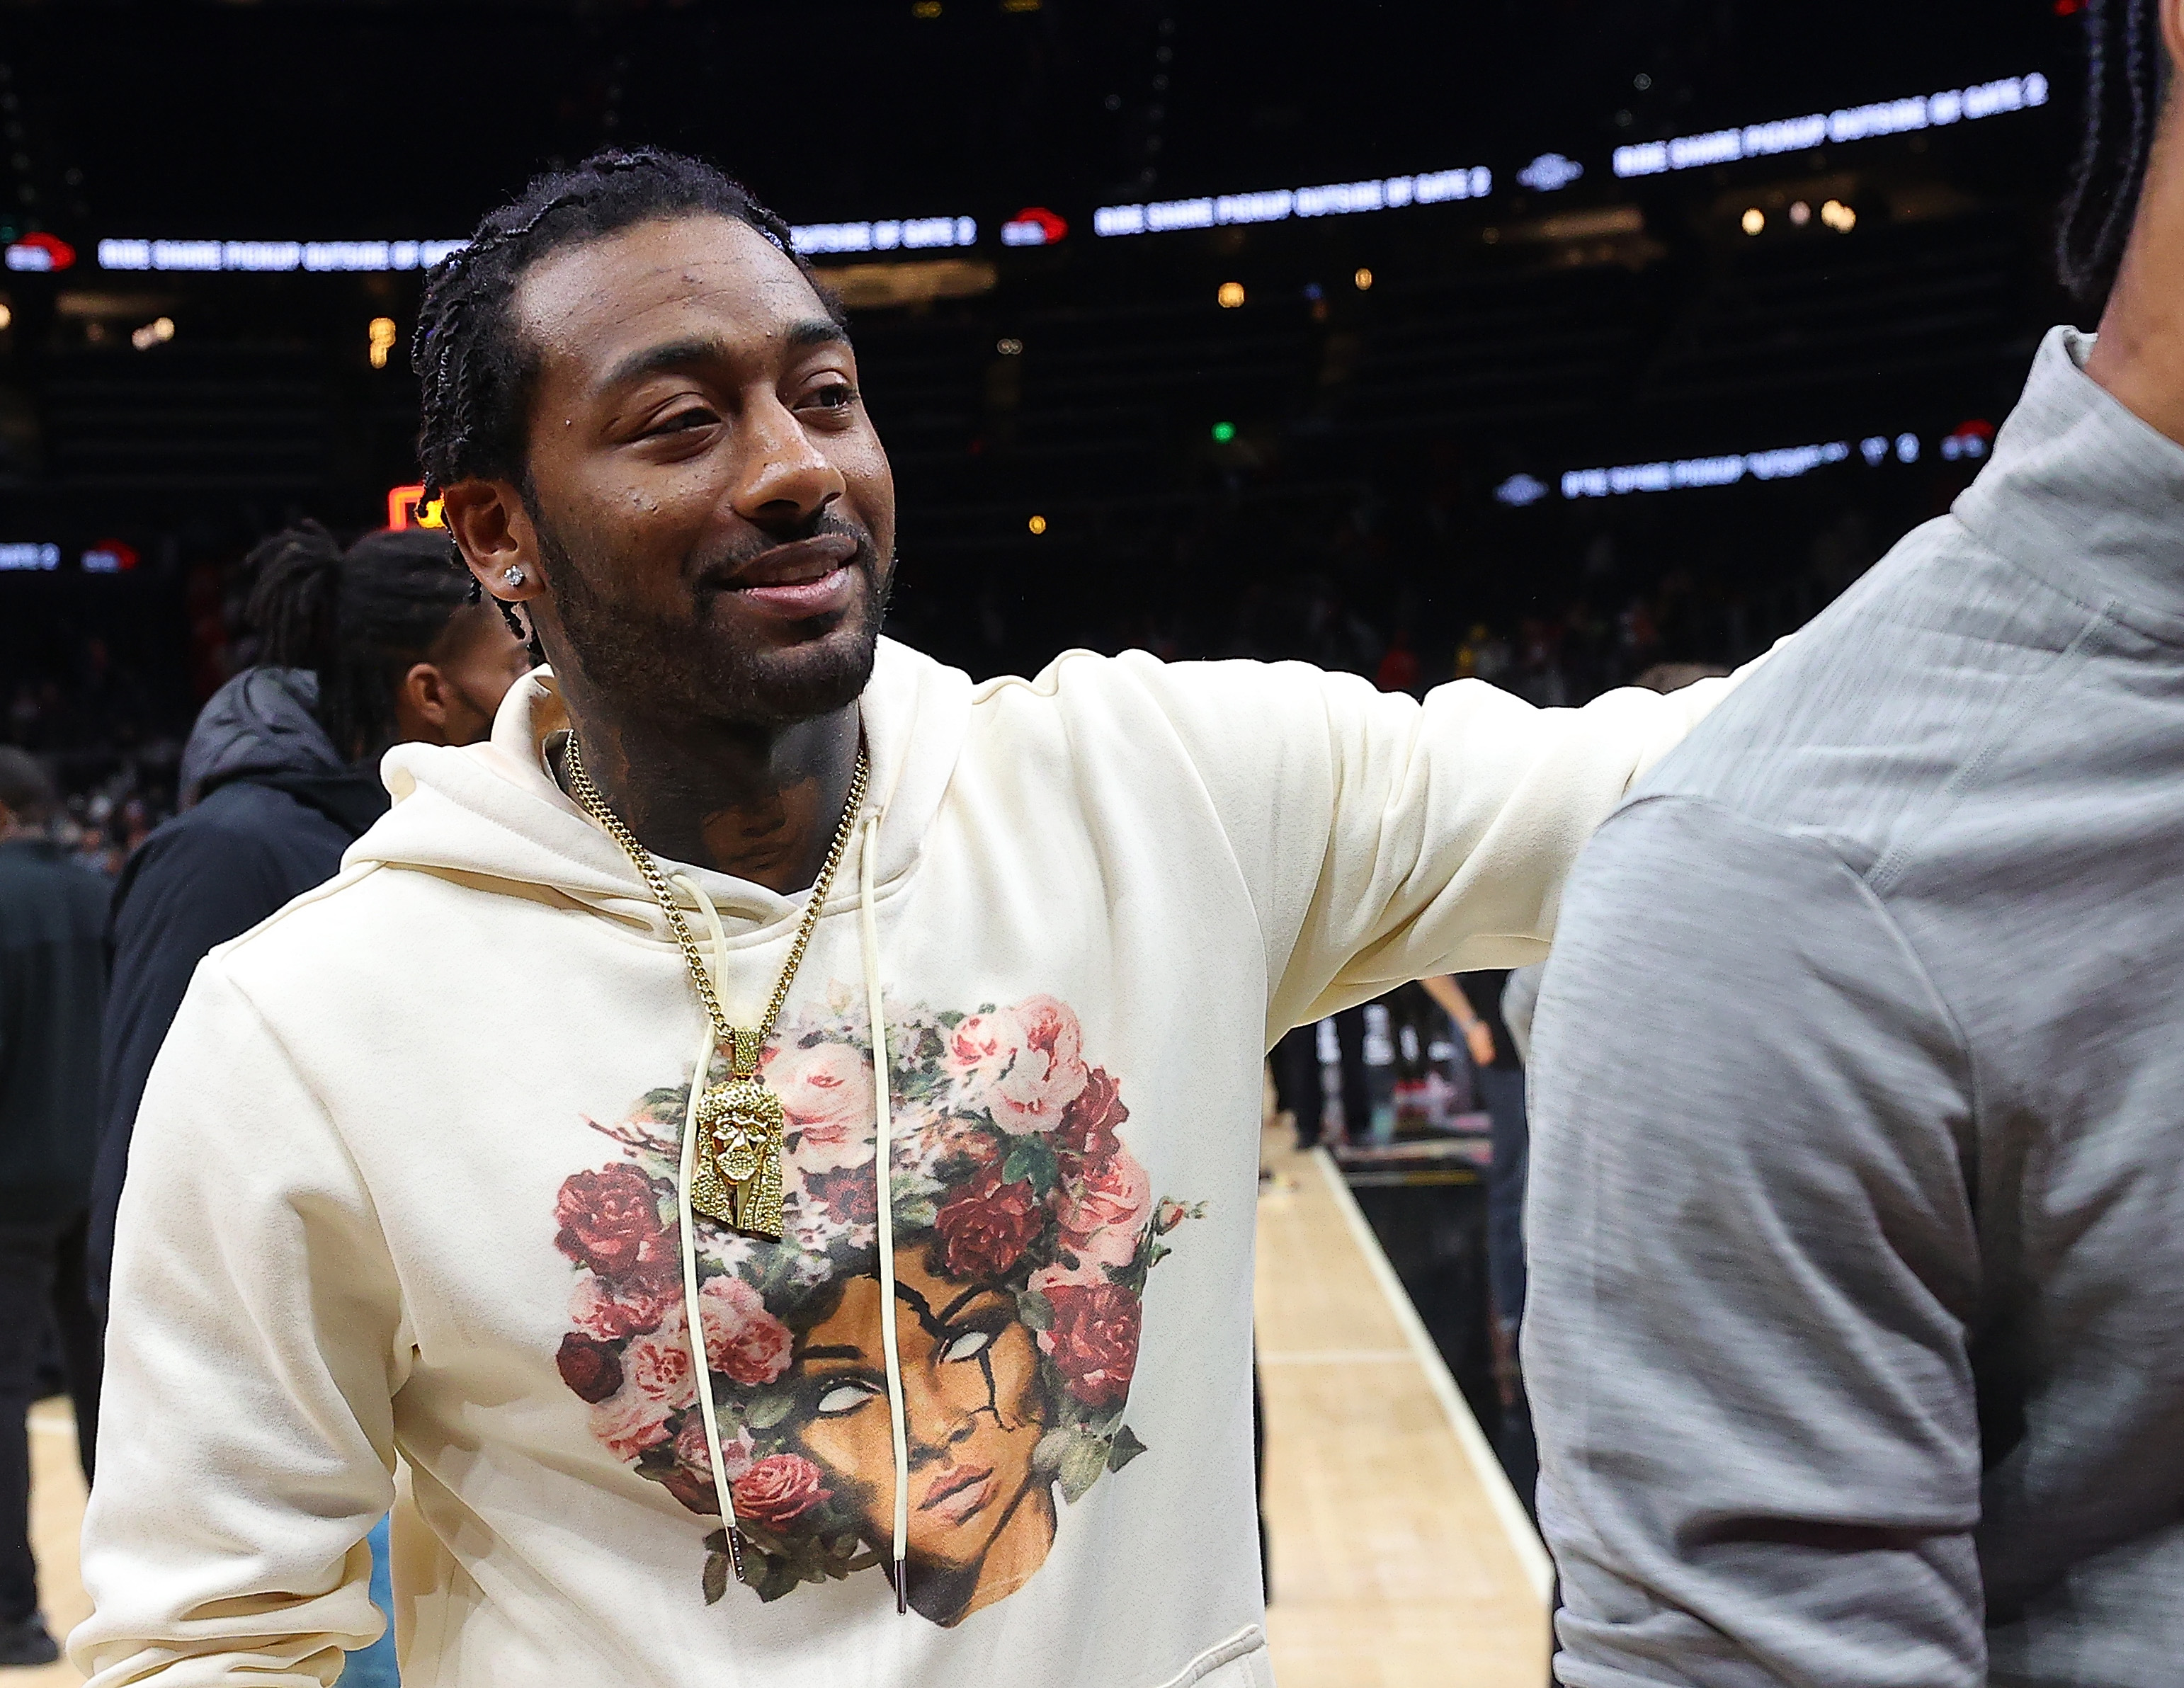 John Wall Gearing Up To Sign With The Clippers